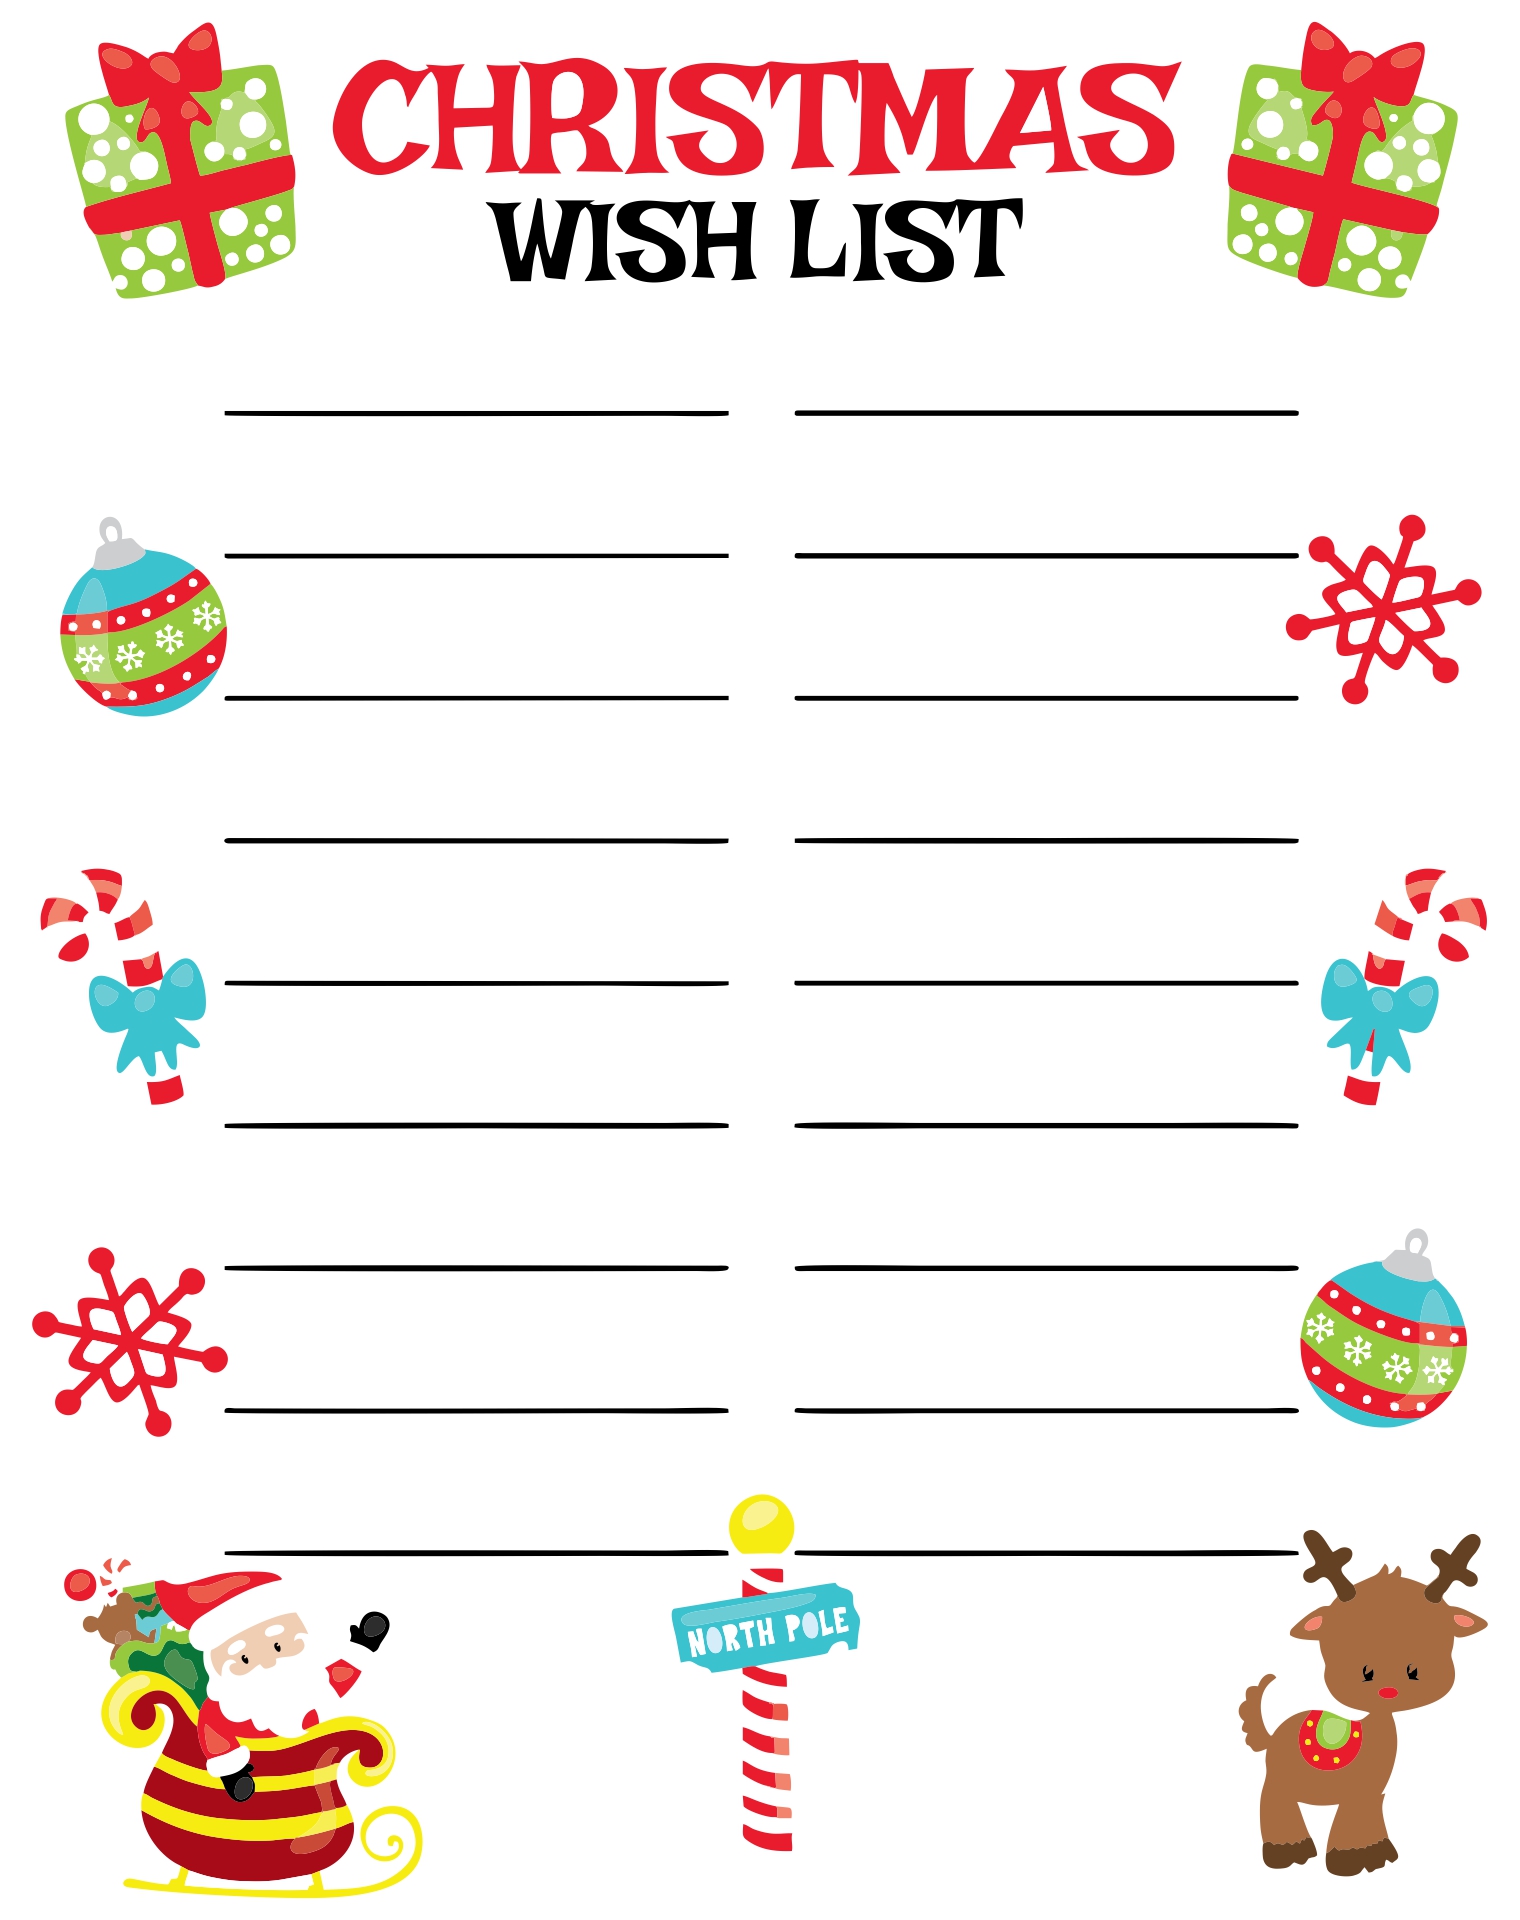 5-best-images-of-free-printable-christmas-list-paper-printable-christmas-wish-list-paper-free